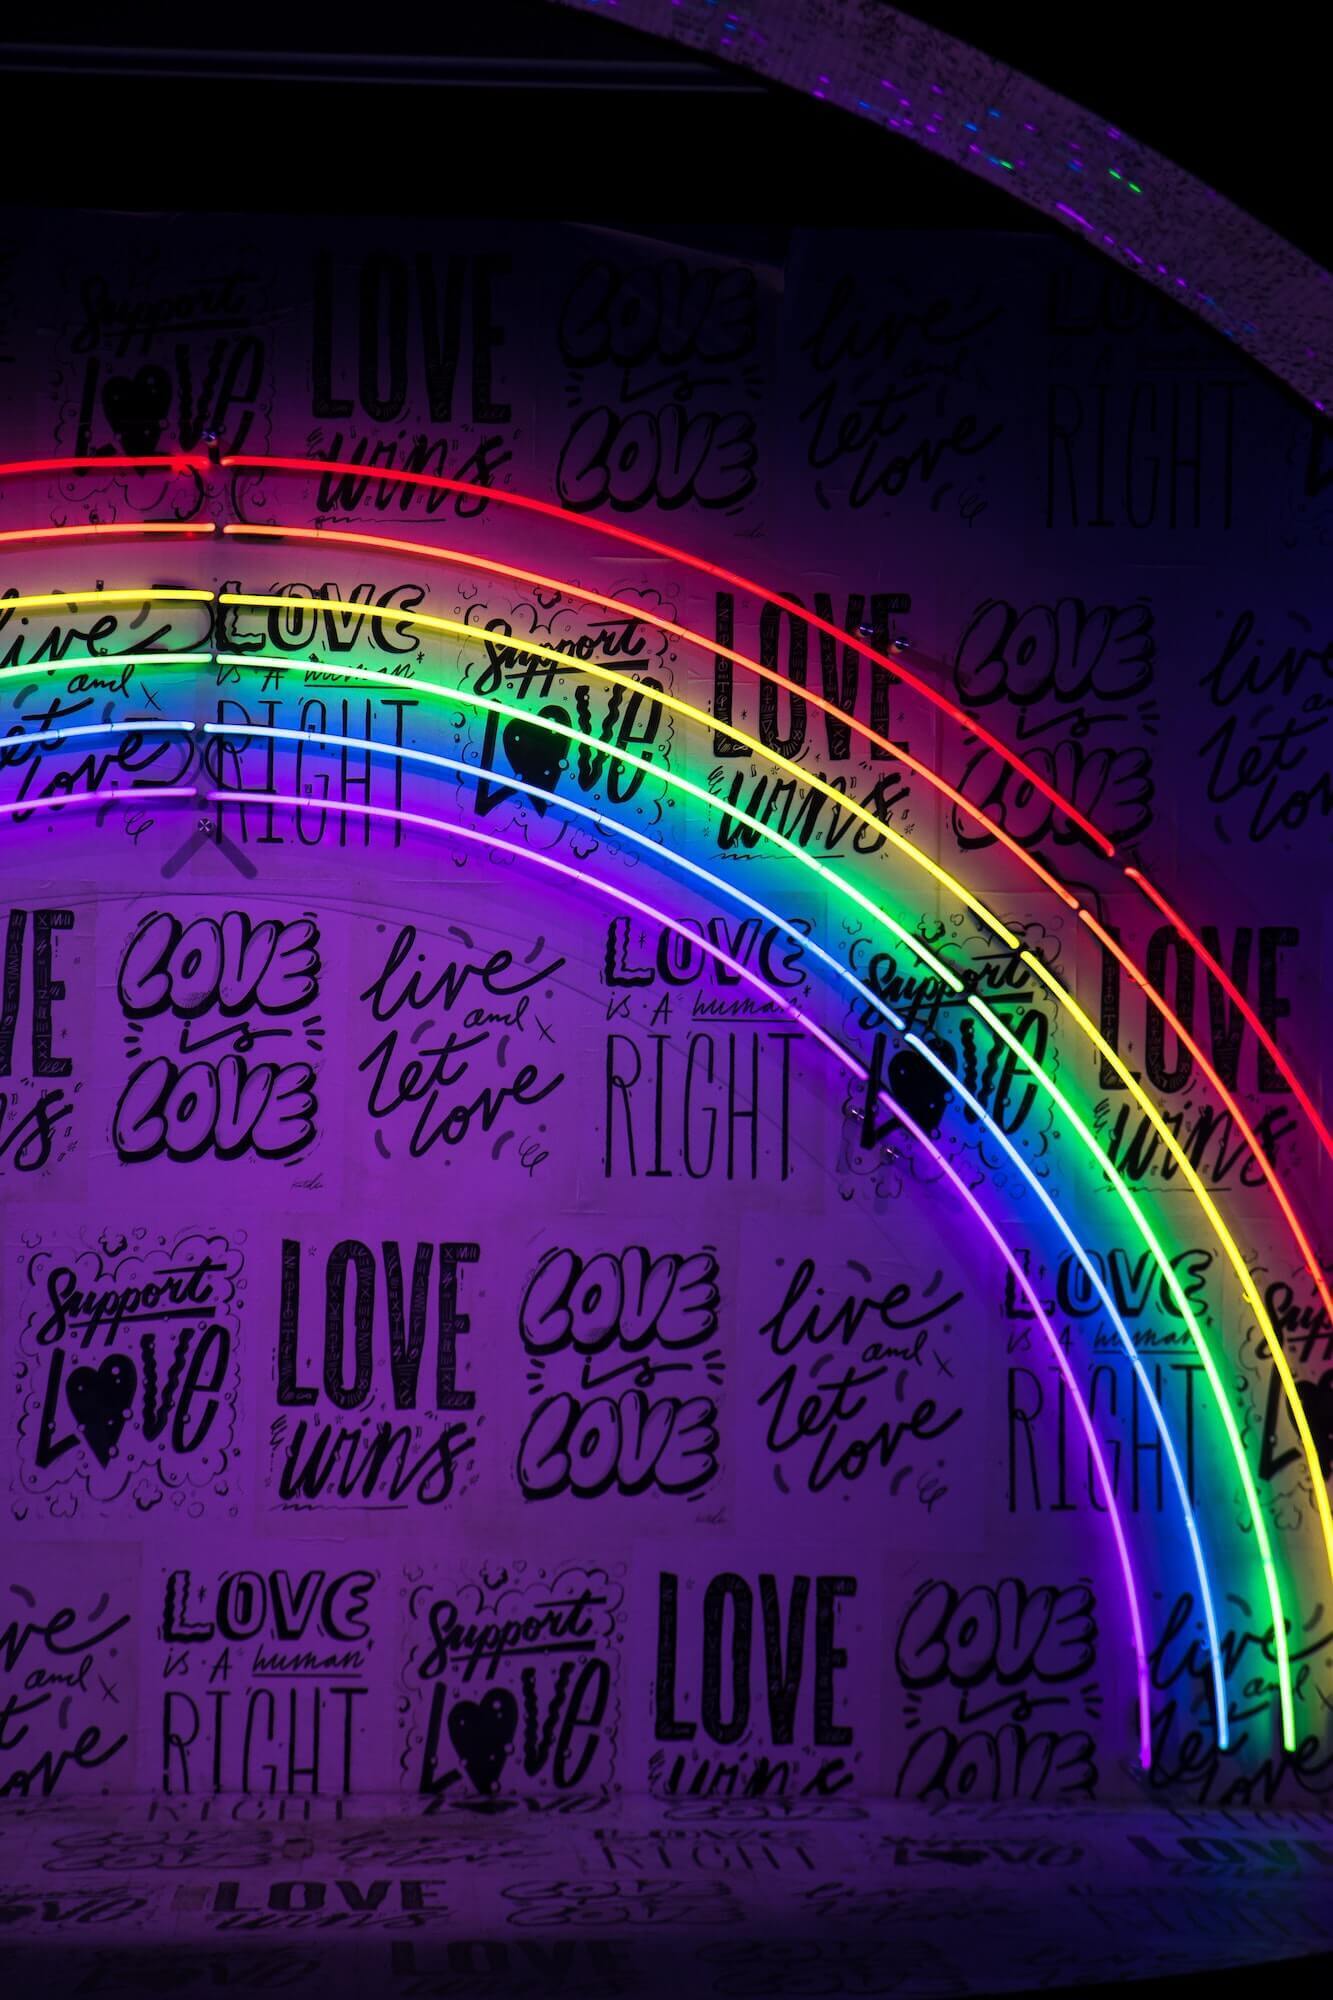 Neon rainbow sign against a background of "Love is Love" and "Love Wins" wallpaper